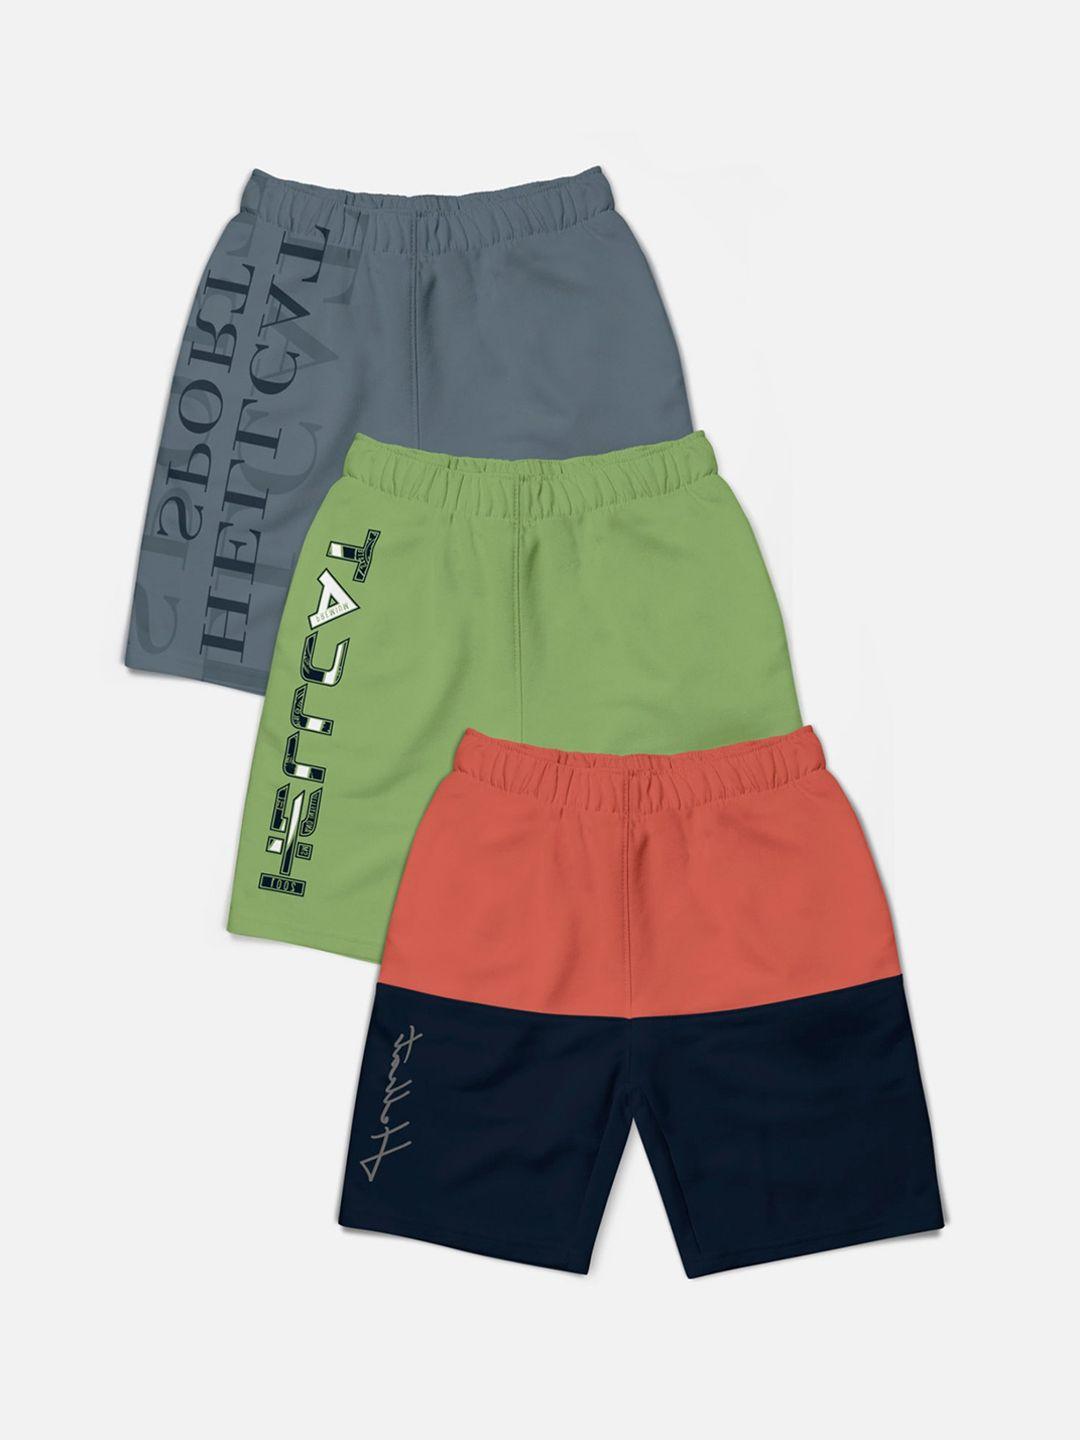 hellcat-boys-pack-of-3-mid-rise-colourblocked-printed-cotton-shorts